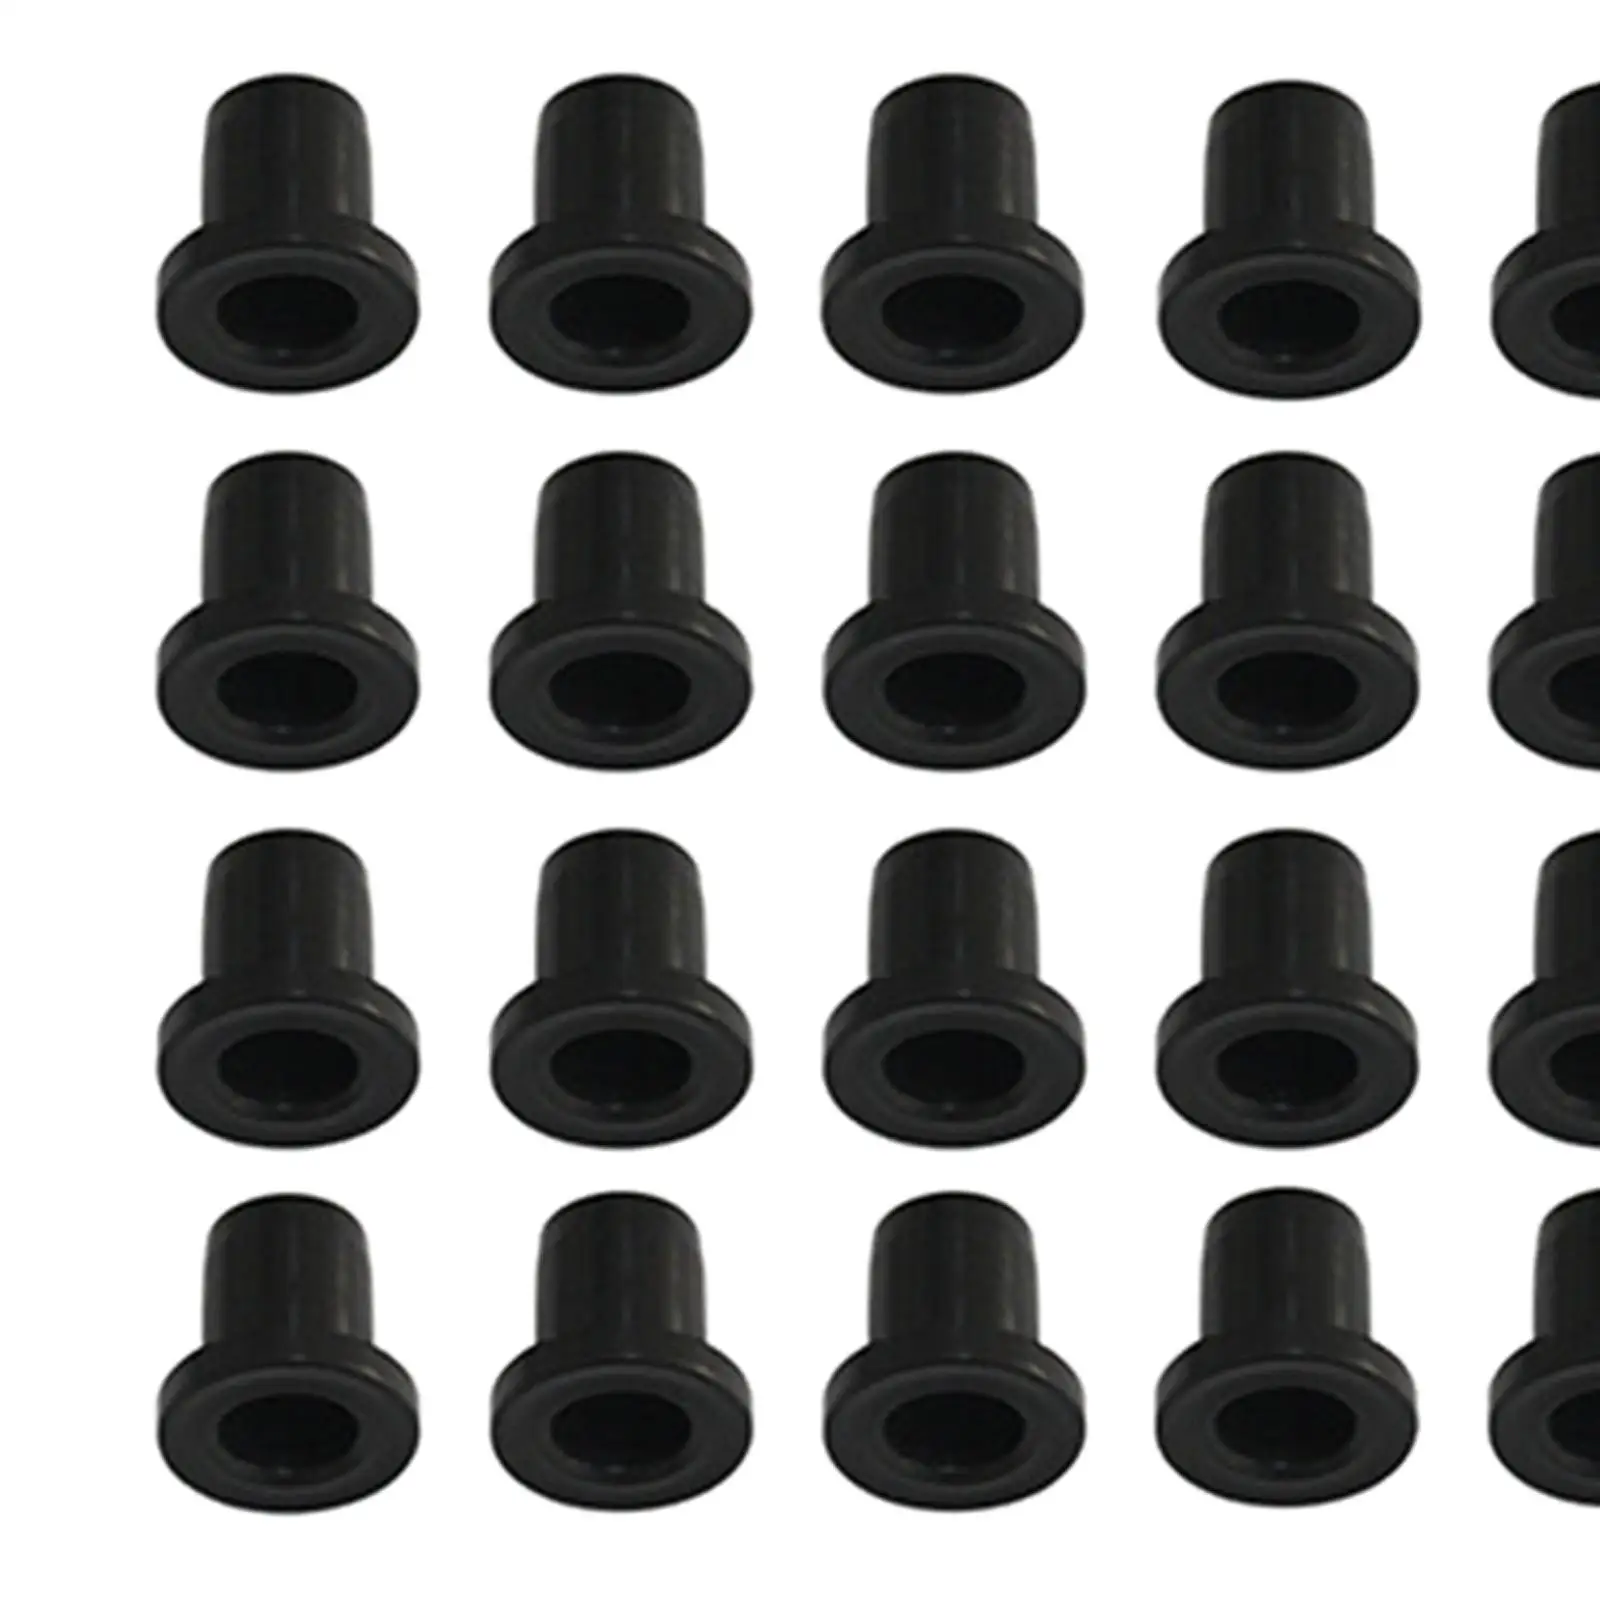 A Arm Bushing Protection Kit Easy Installation High Quality Complete Kit Replacement Accessories for Polaris Ranger XP 900